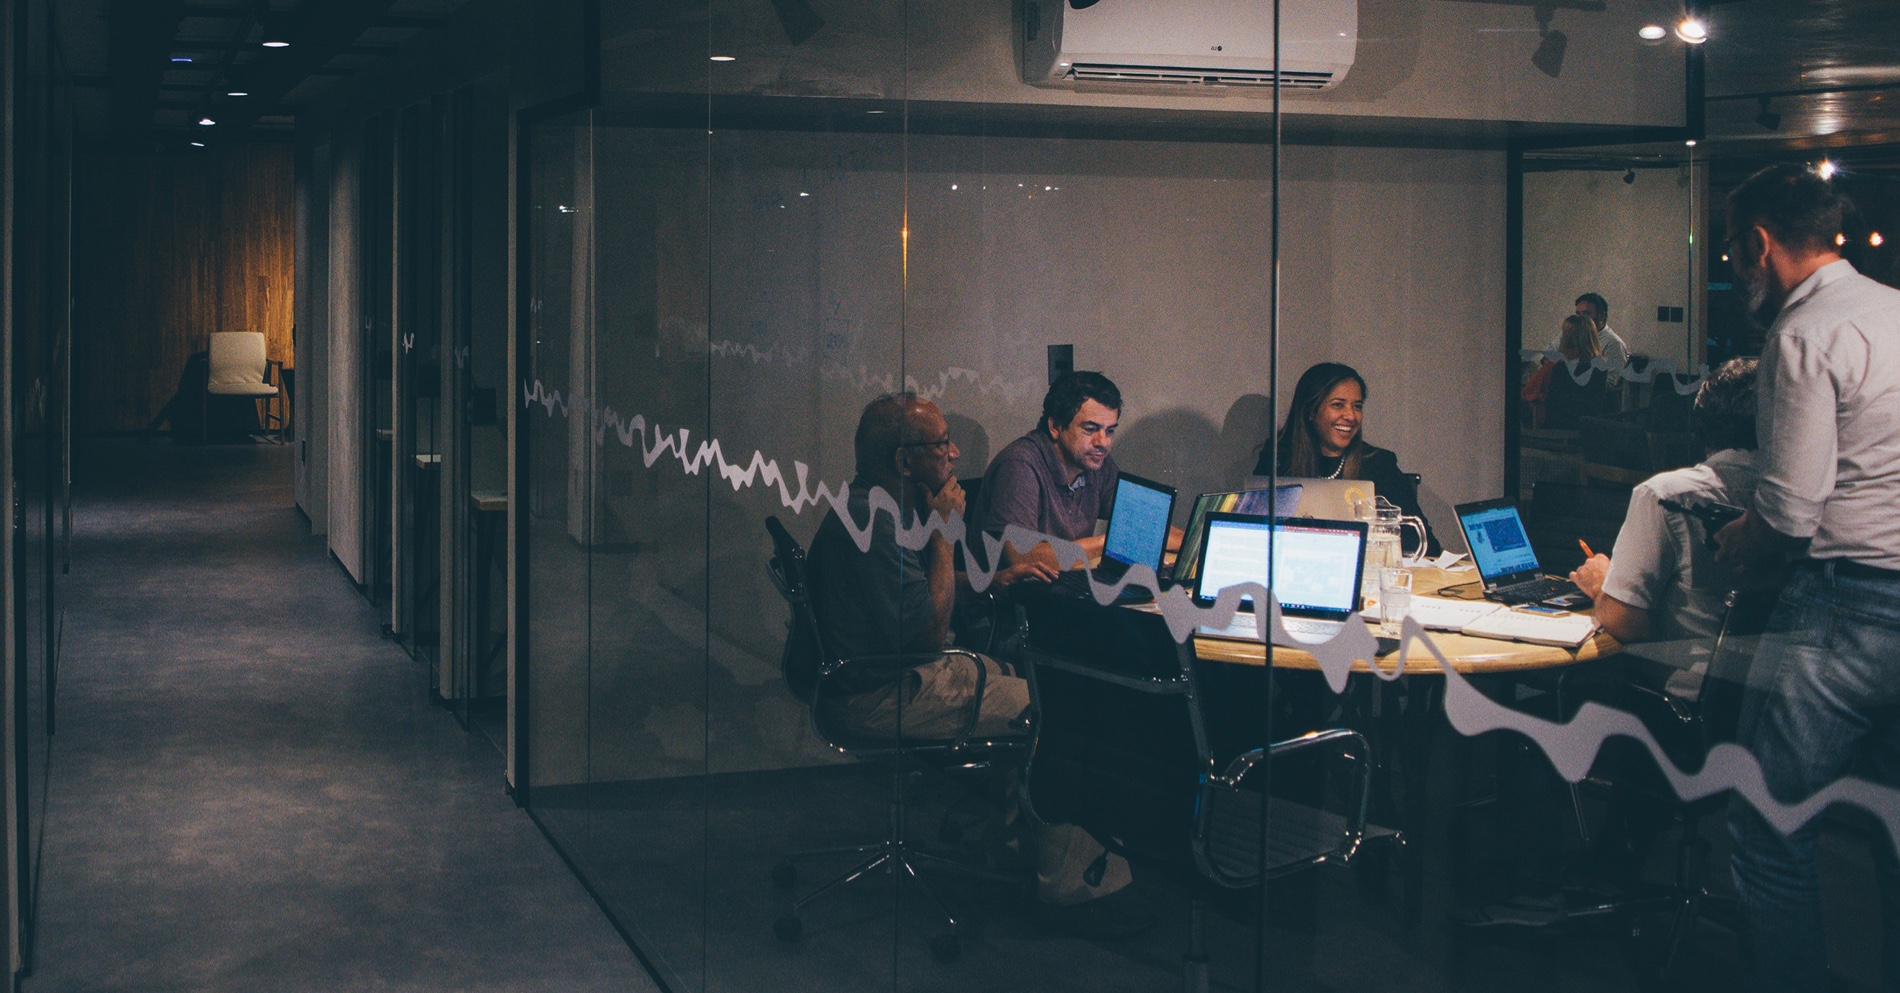 A group of people in a business meeting, behind the glass of an office.